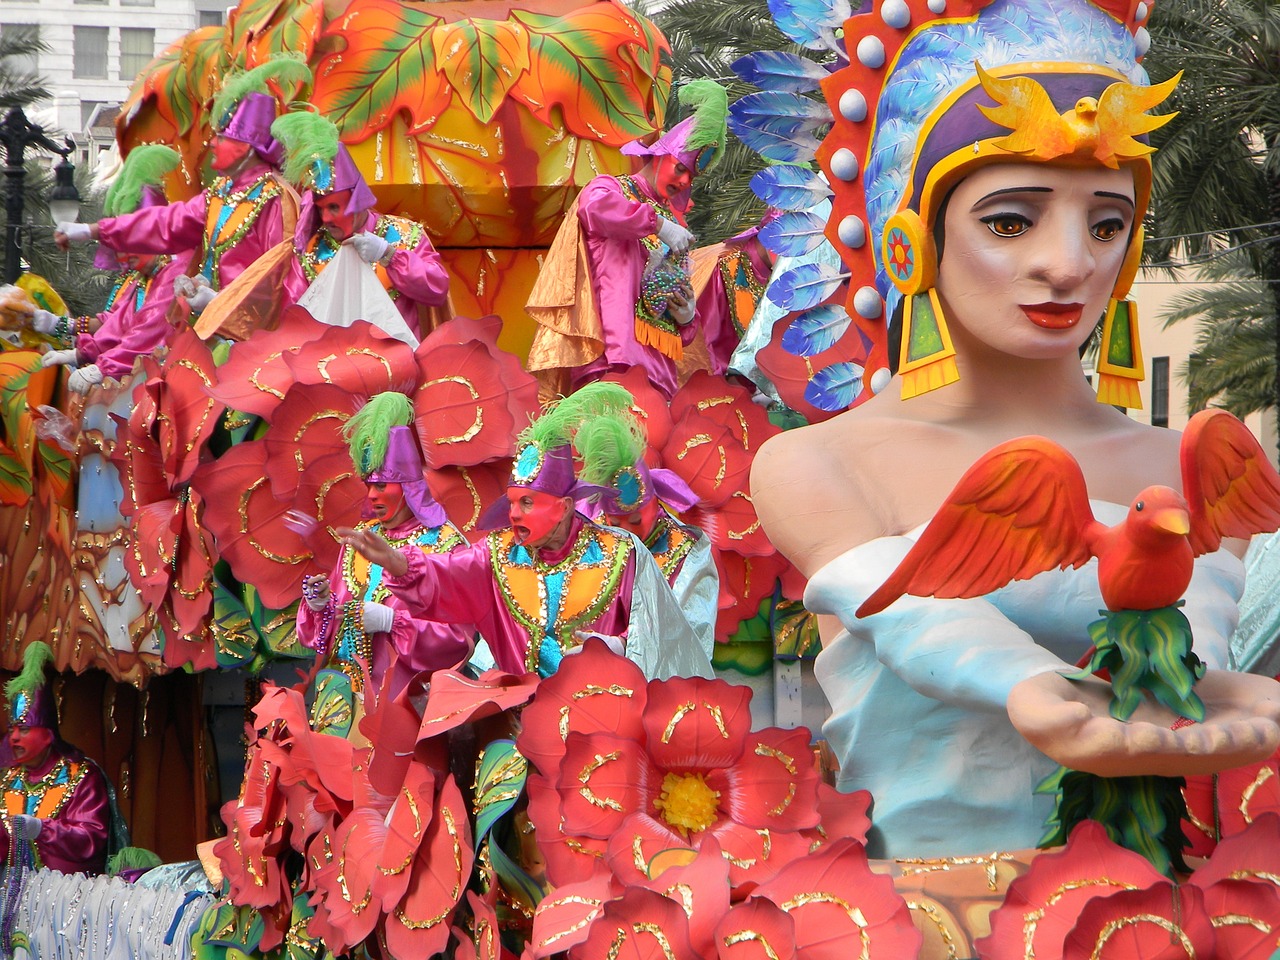 Bright red, yellow and blue decorations and figures sit on a Mardi Gras bloat